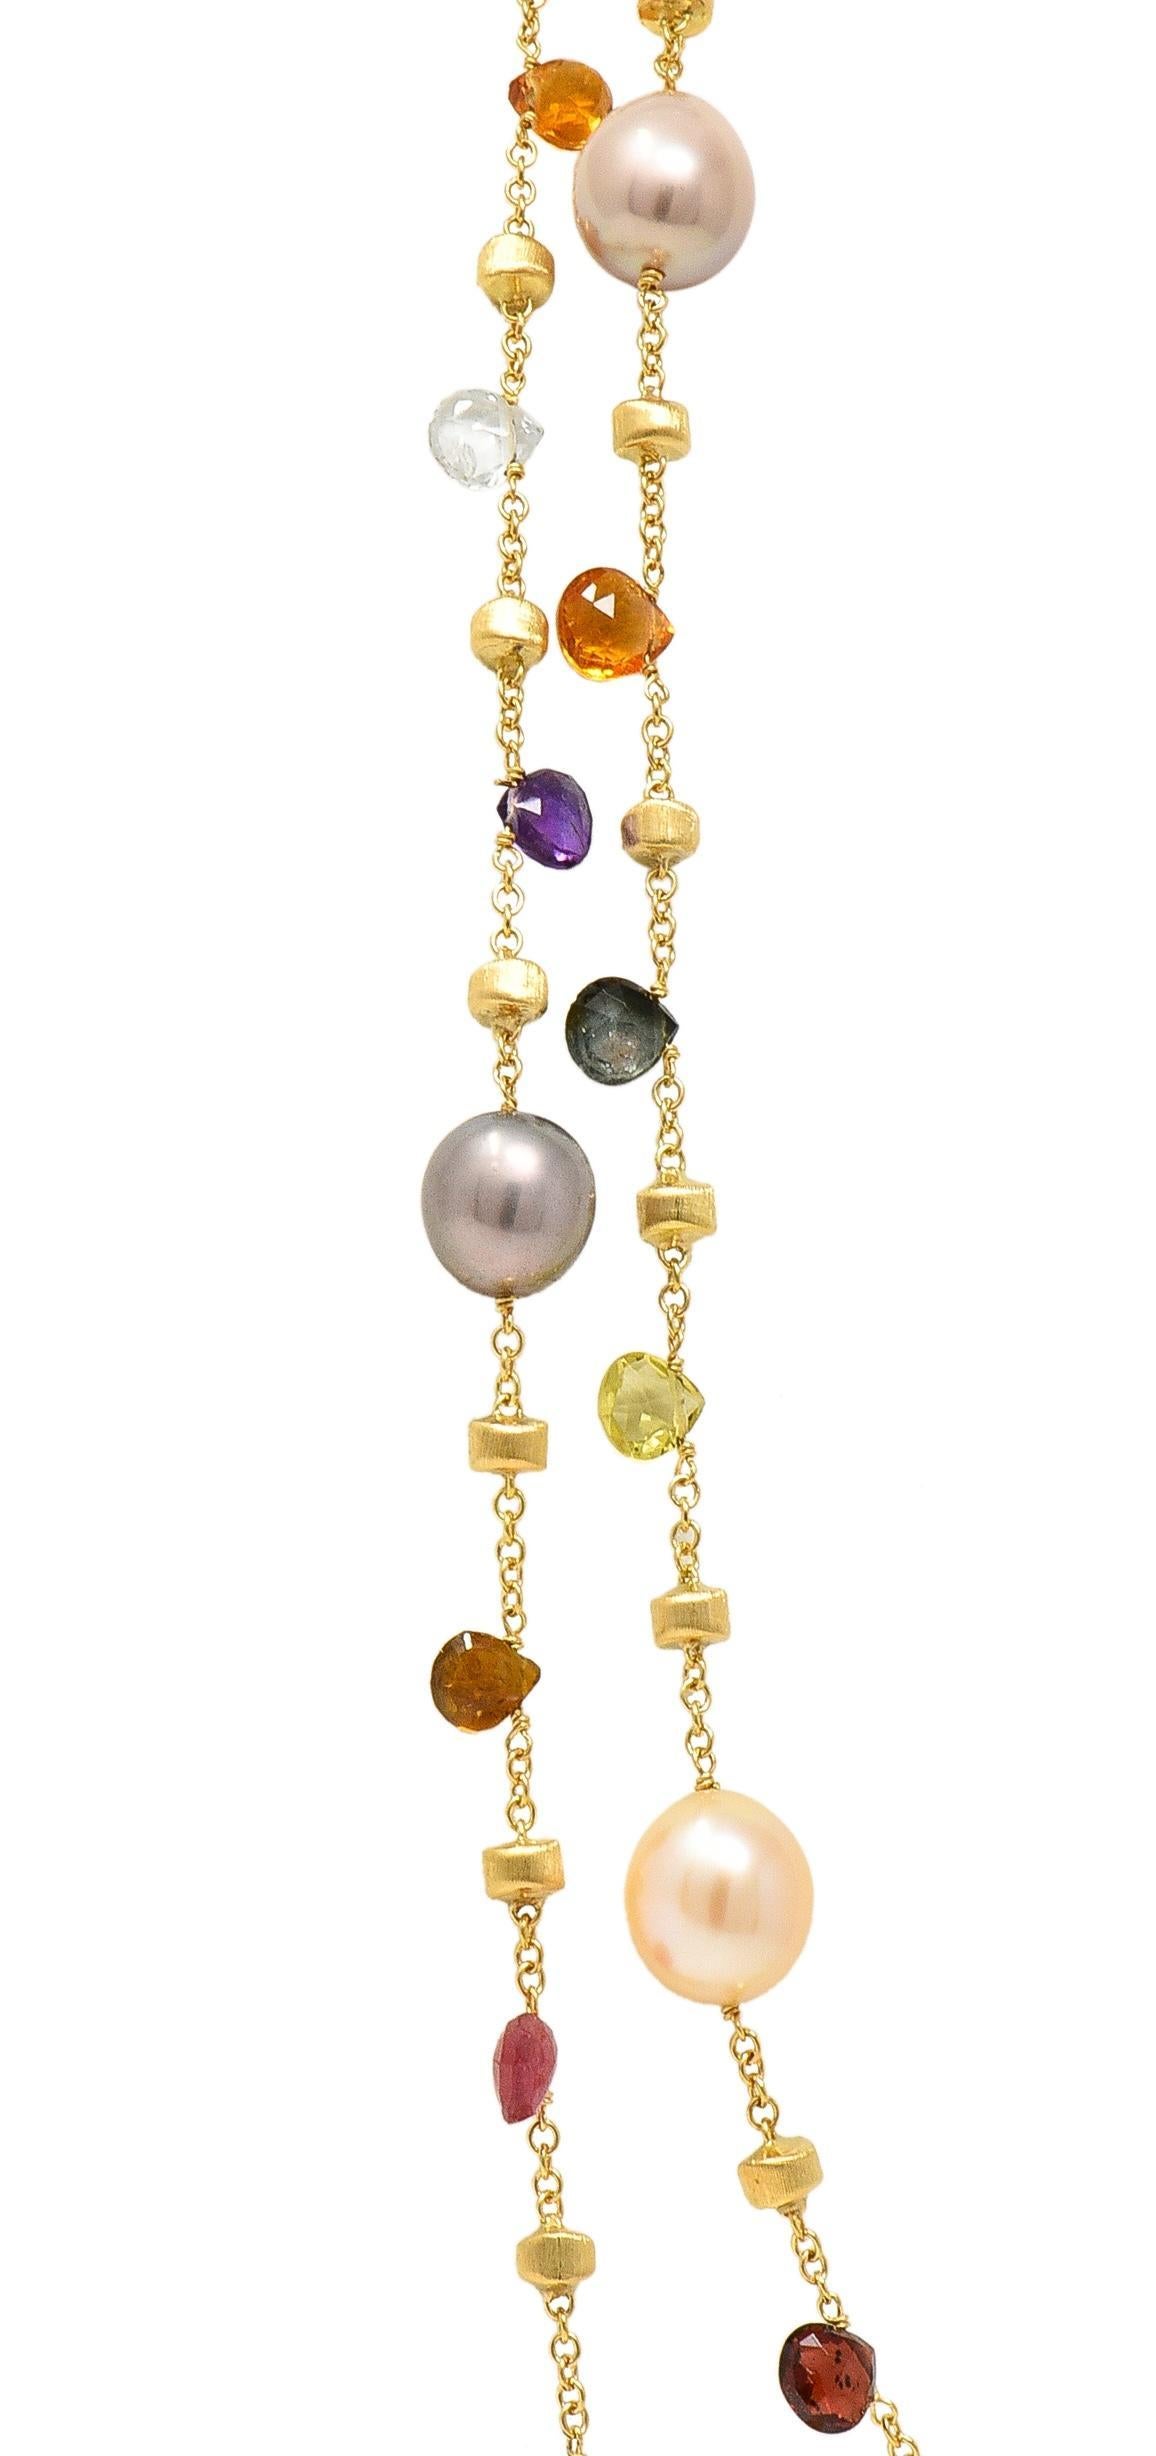 Marco Bicego Cultured Pearl Multi-Gem 18 Karat Yellow Gold Confetti Necklace For Sale 1